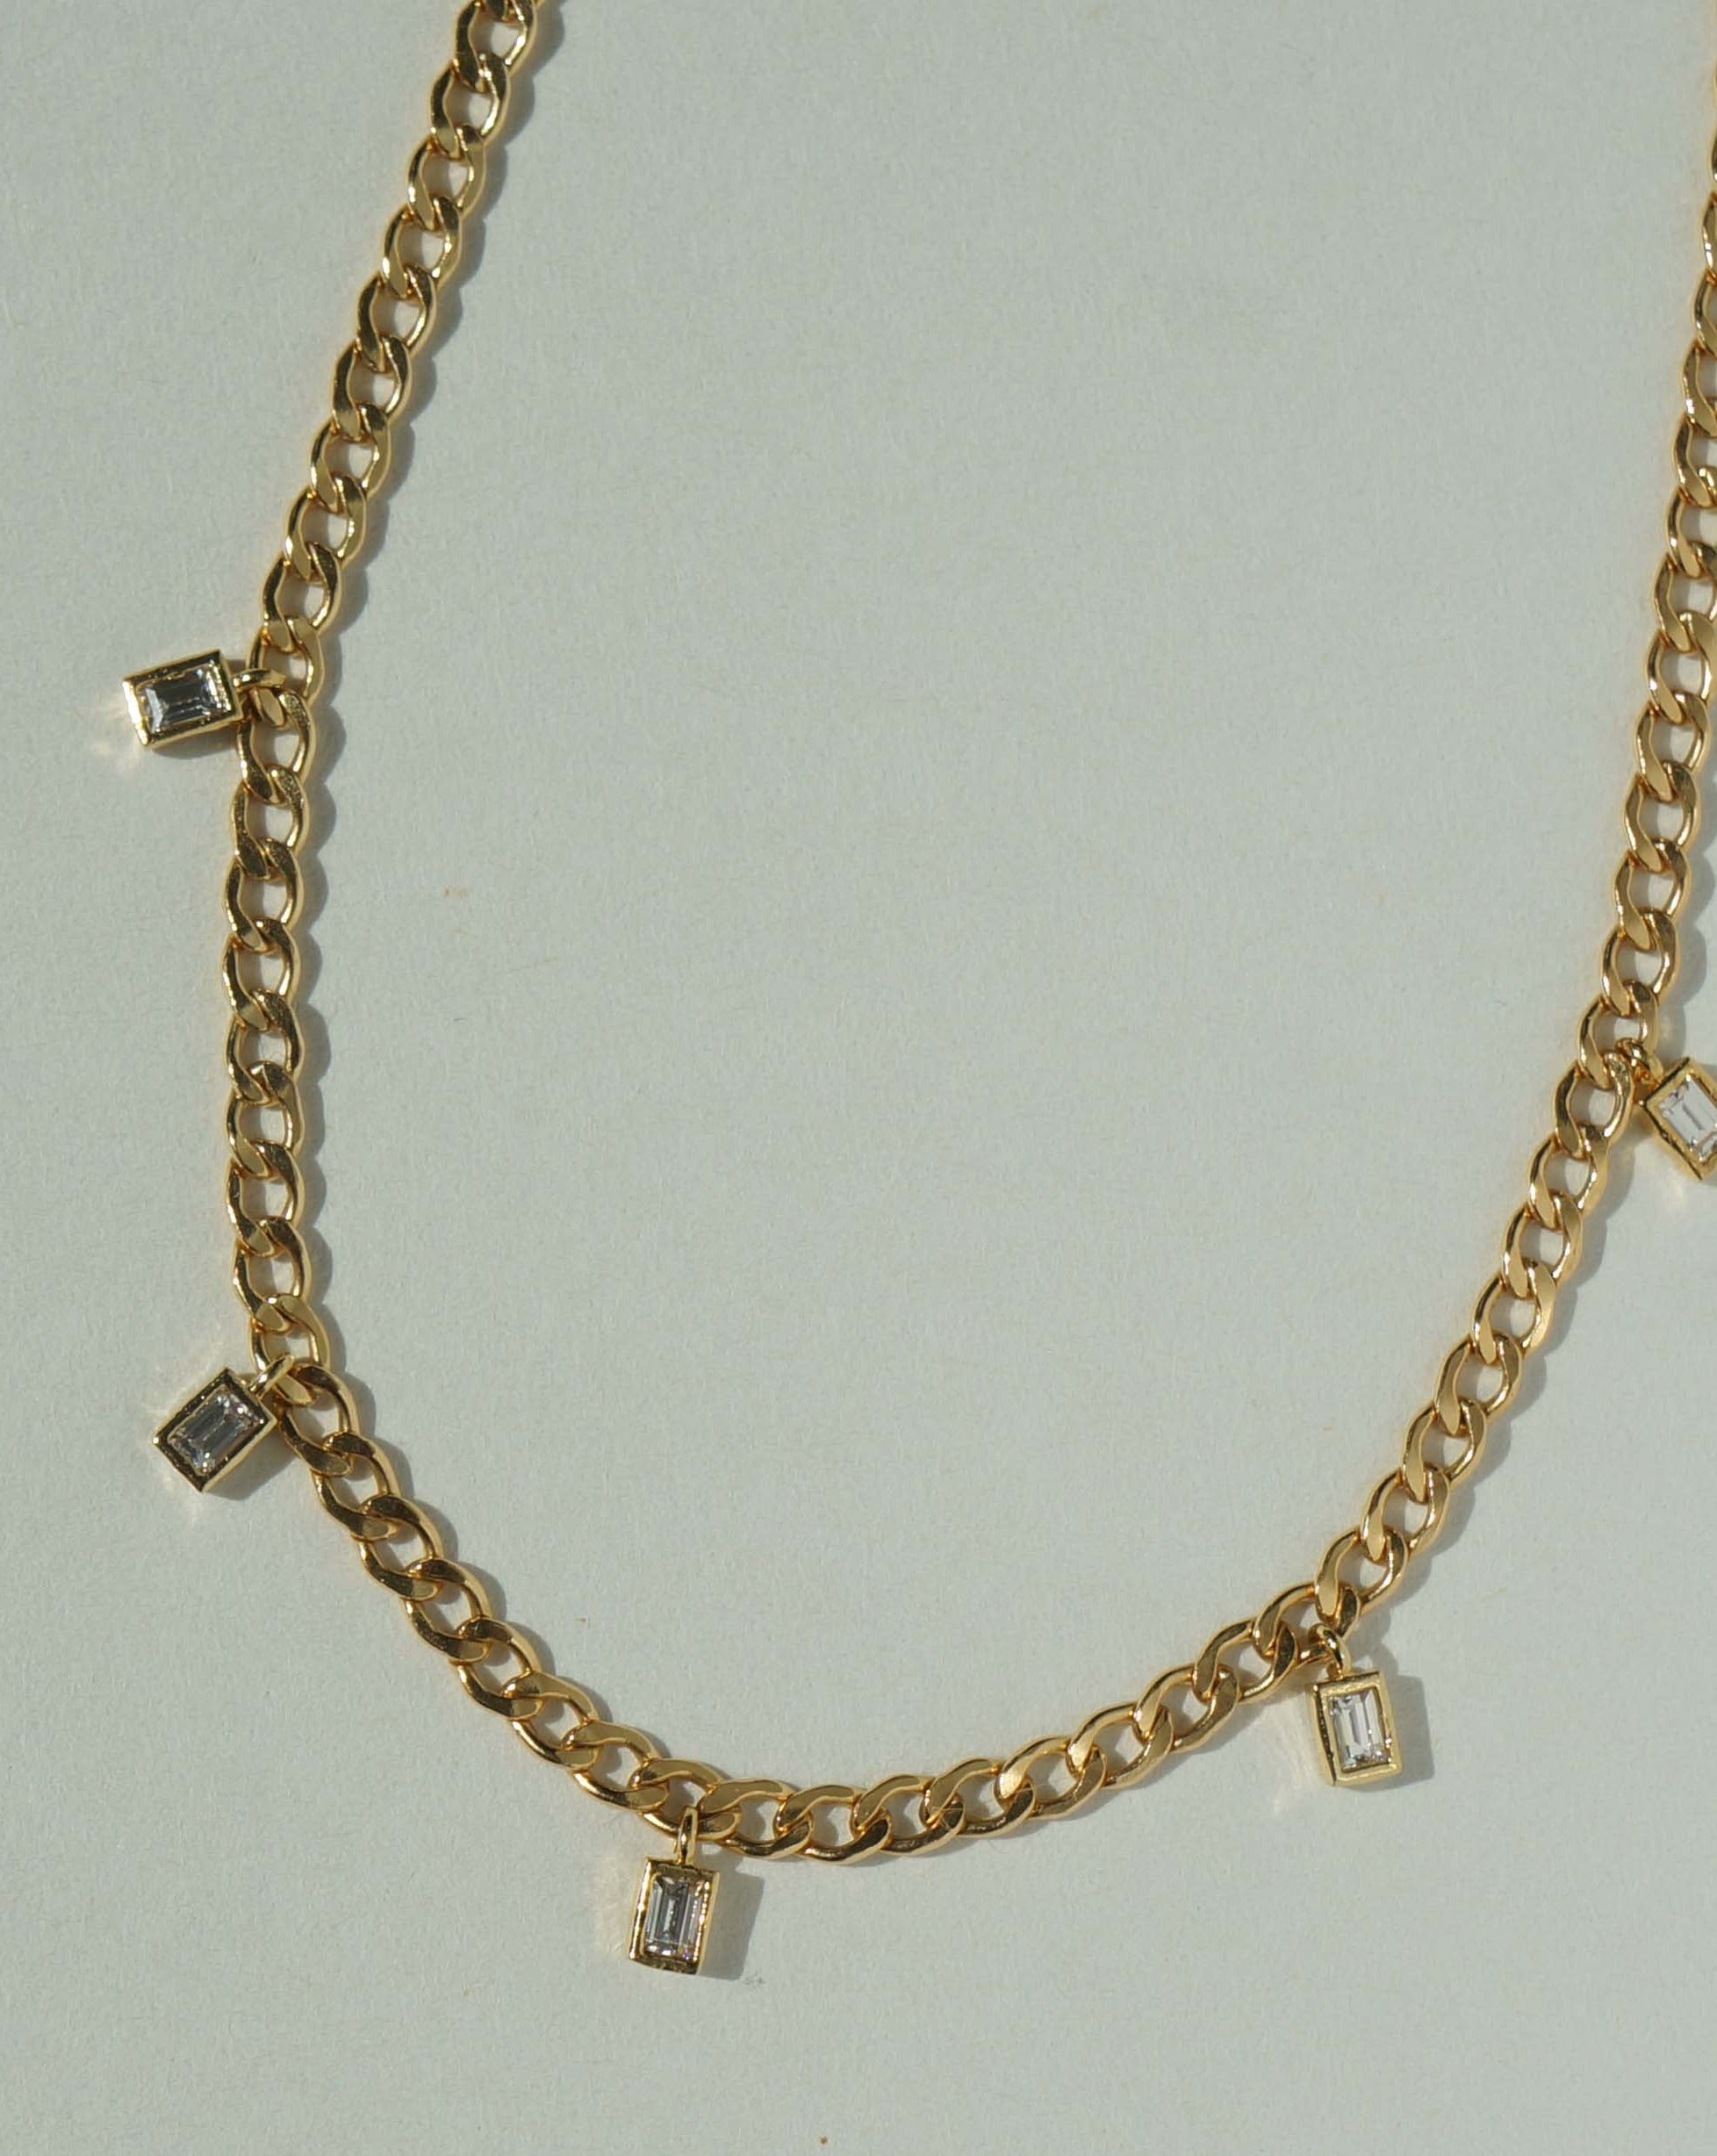 Mia Necklace by KOZAKH. A 16 to 18 inch adjustable length Flat Cuban Link Chain necklace, crafted in 14K Gold Filled, featuring square cut Cubic Zirconia charms.